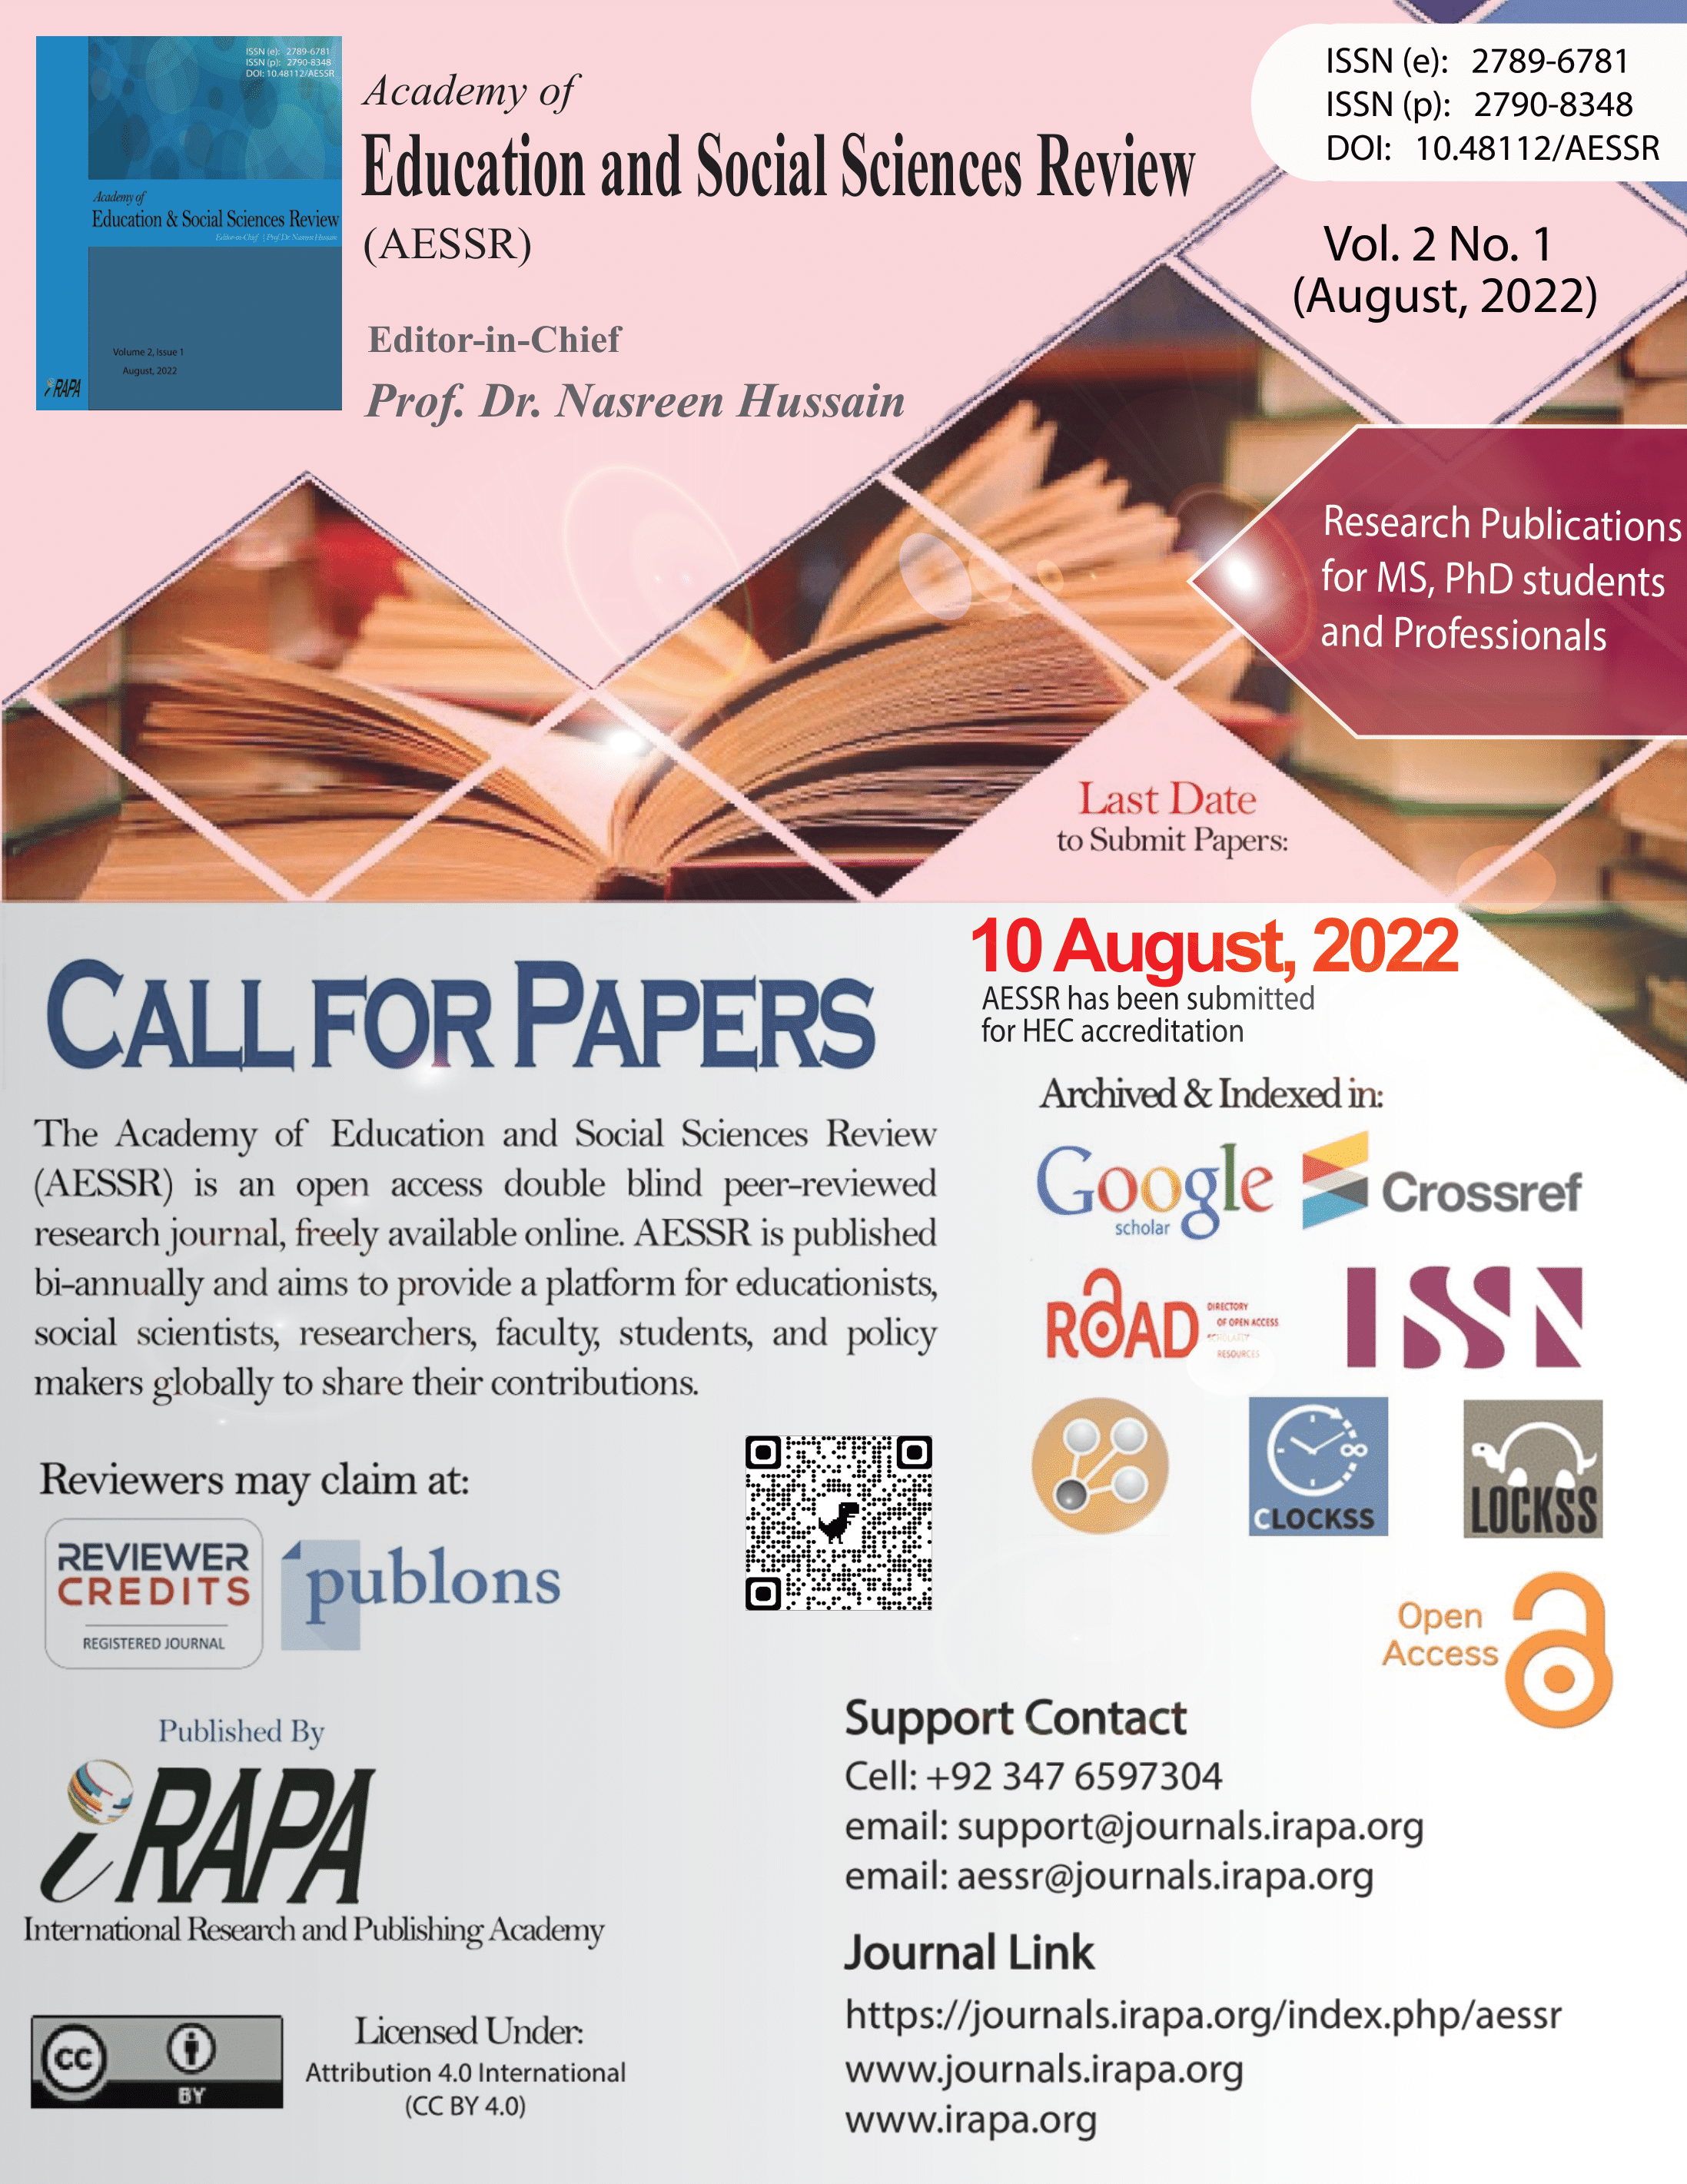 Call-for-papers-1.png